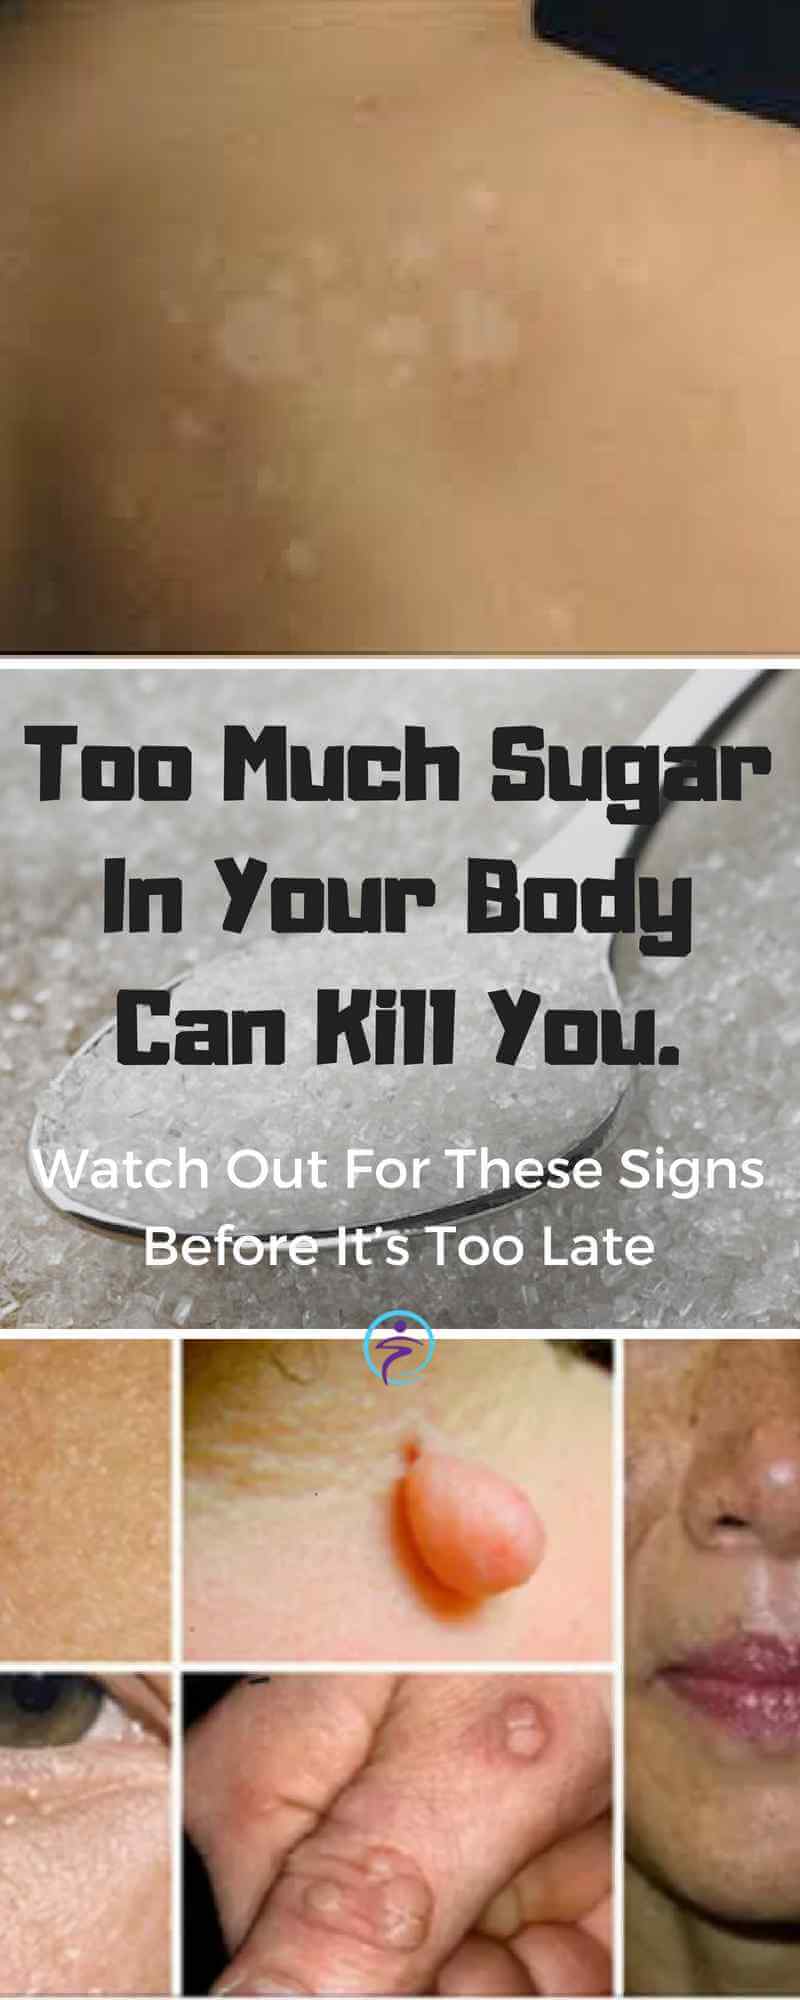 Too Much Sugar In Your Body Can Kill You. Watch Out For These Signs Before It’s Too Late